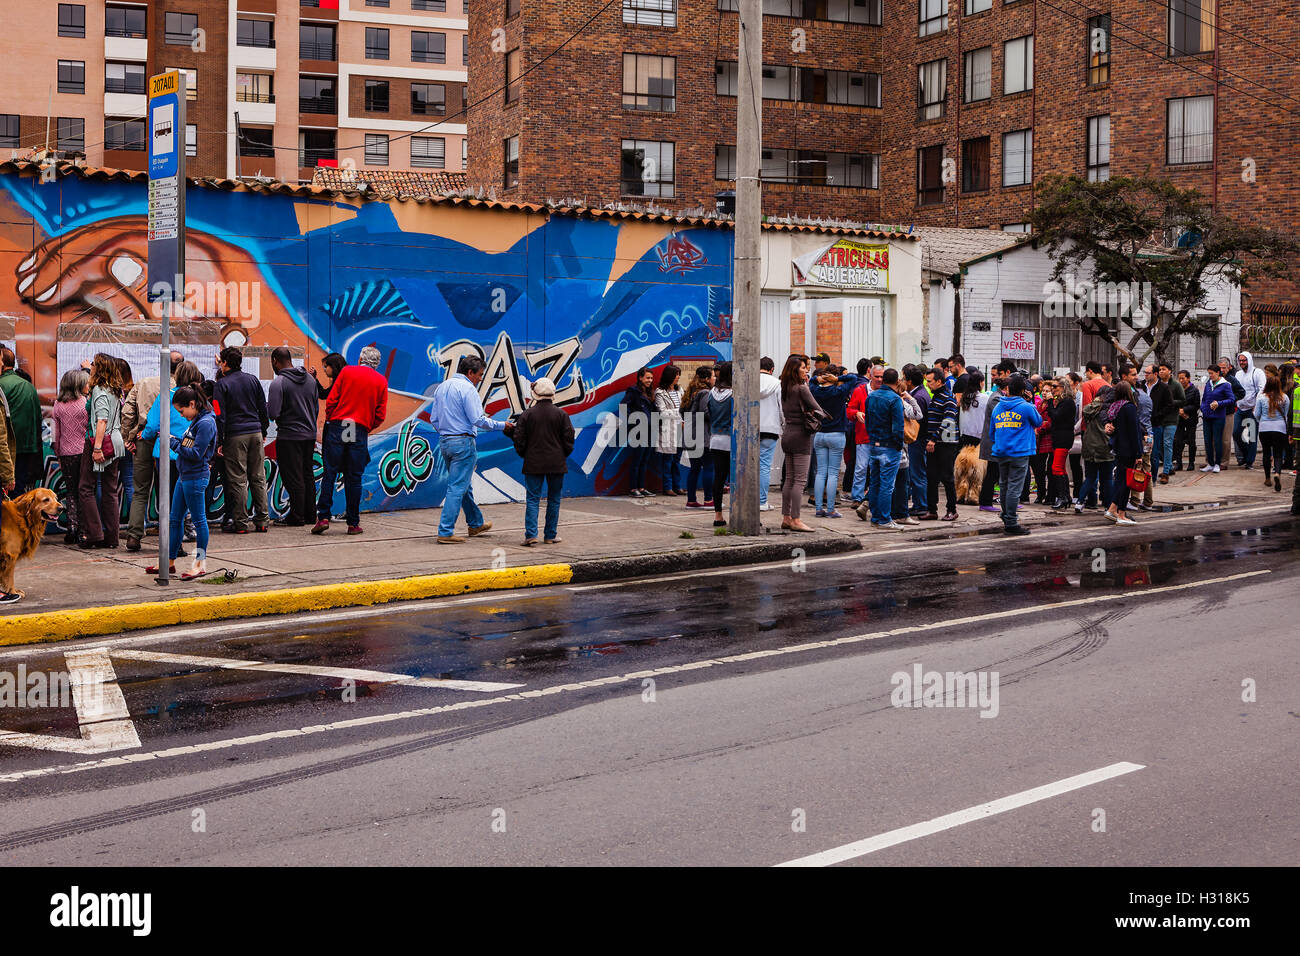 Bogota, Colombia - October 02, 2016: Voters queue up on the right, to enter a polling station on Carrera 9, in the Andean capital city of Bogota, in the South American country of Colombia, to vote on the historic Plebiscite on the peace process with FARC.To the left, behind the people is part of a mural painted in the bright colours of Latin America, dedicated to the Peace Process; the word, Paz, Spanish for peace, is partially visible. Stock Photo